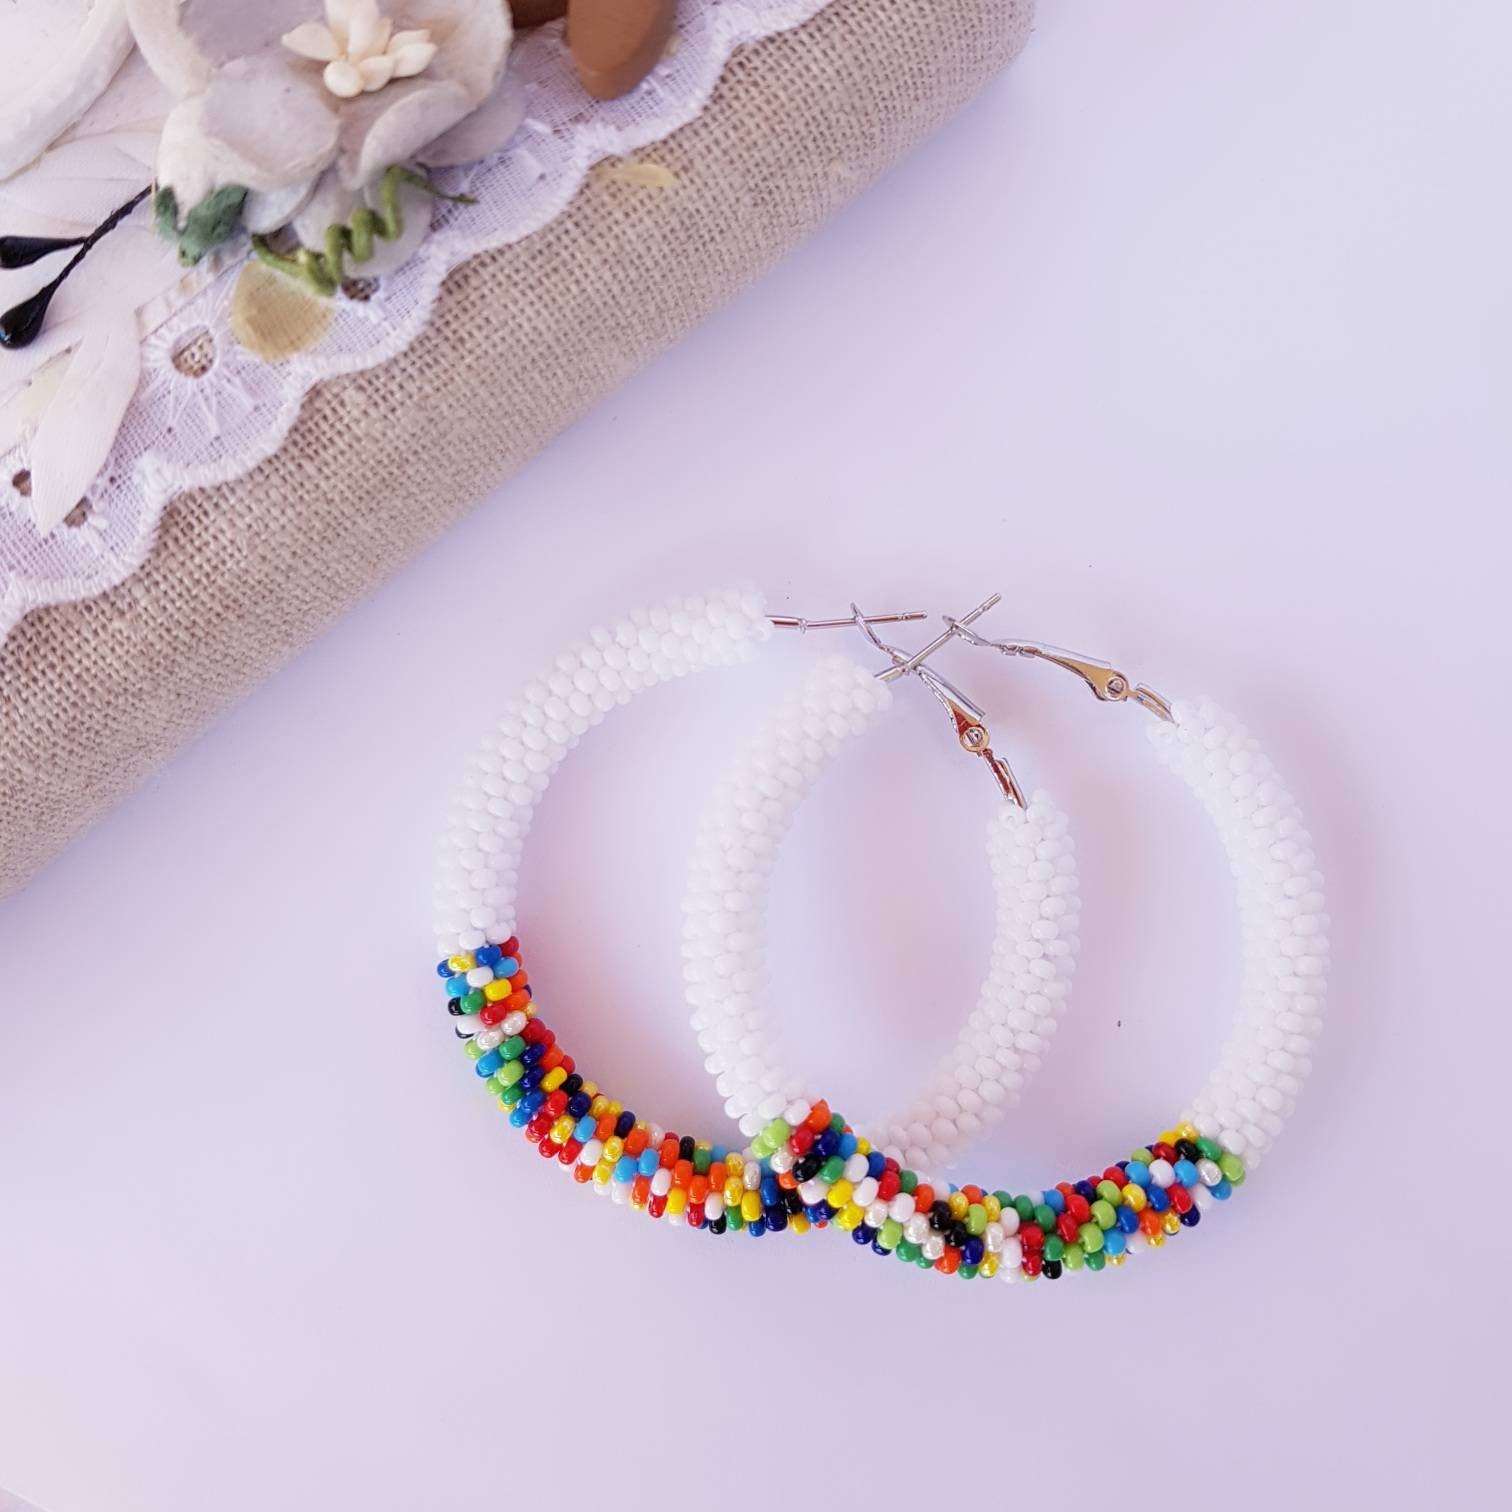 White and Colorful Beaded Hoop Earrings Large Multicolor Seed | Etsy